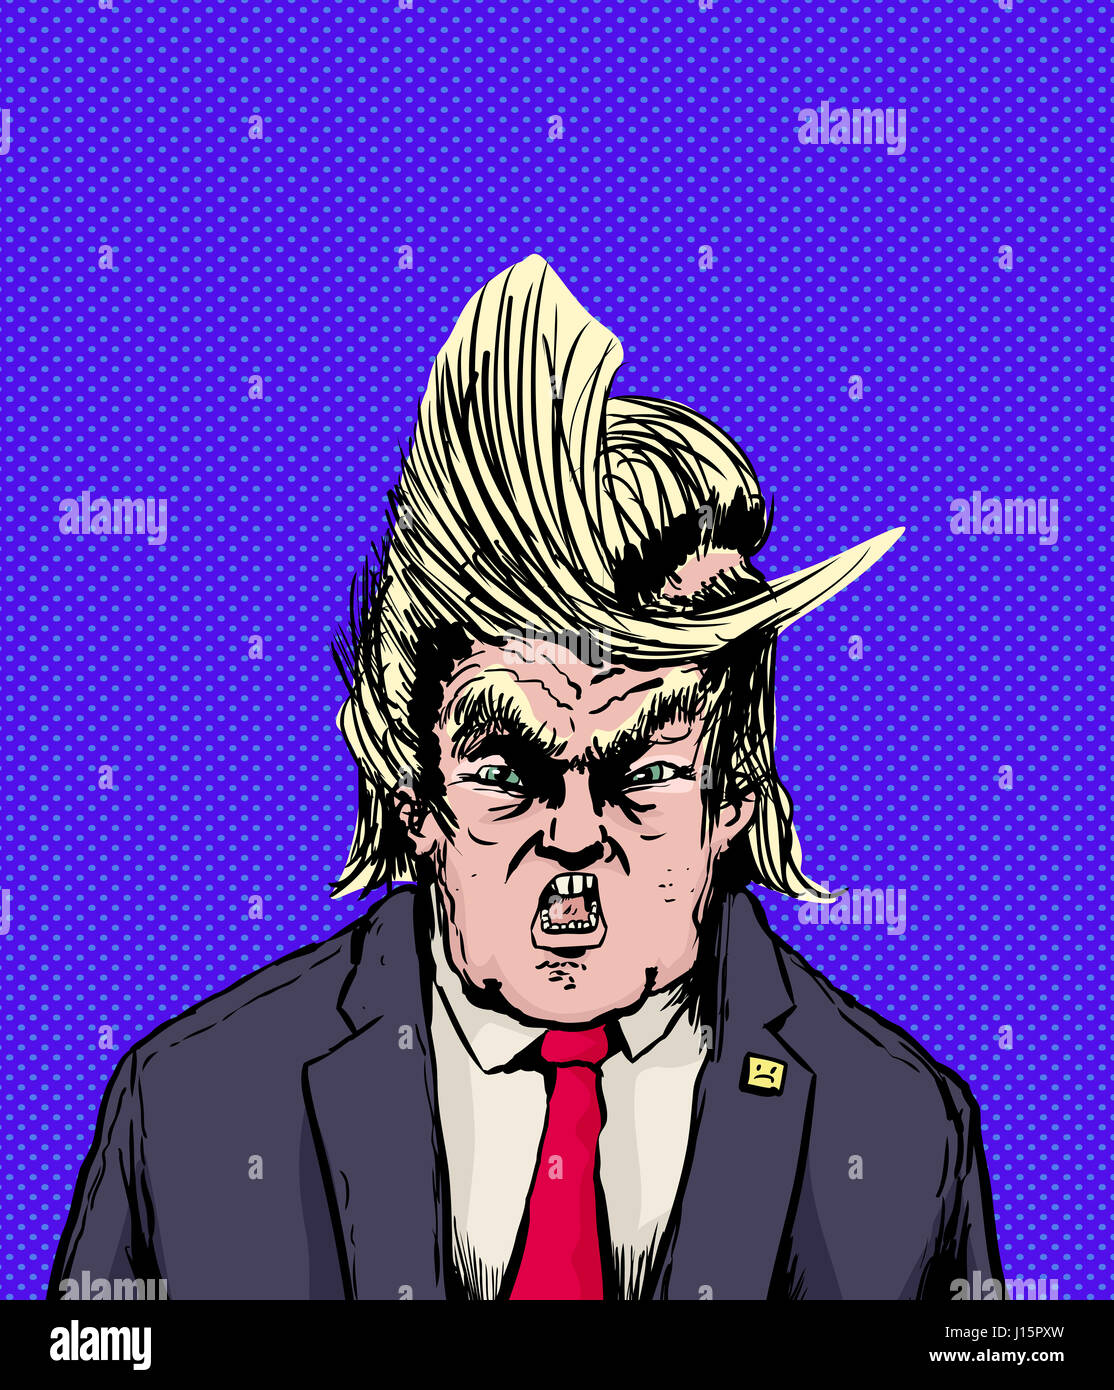 April 18, 2017. Caricature of Donald Trump in weird parted hairdo and yelling Stock Photo